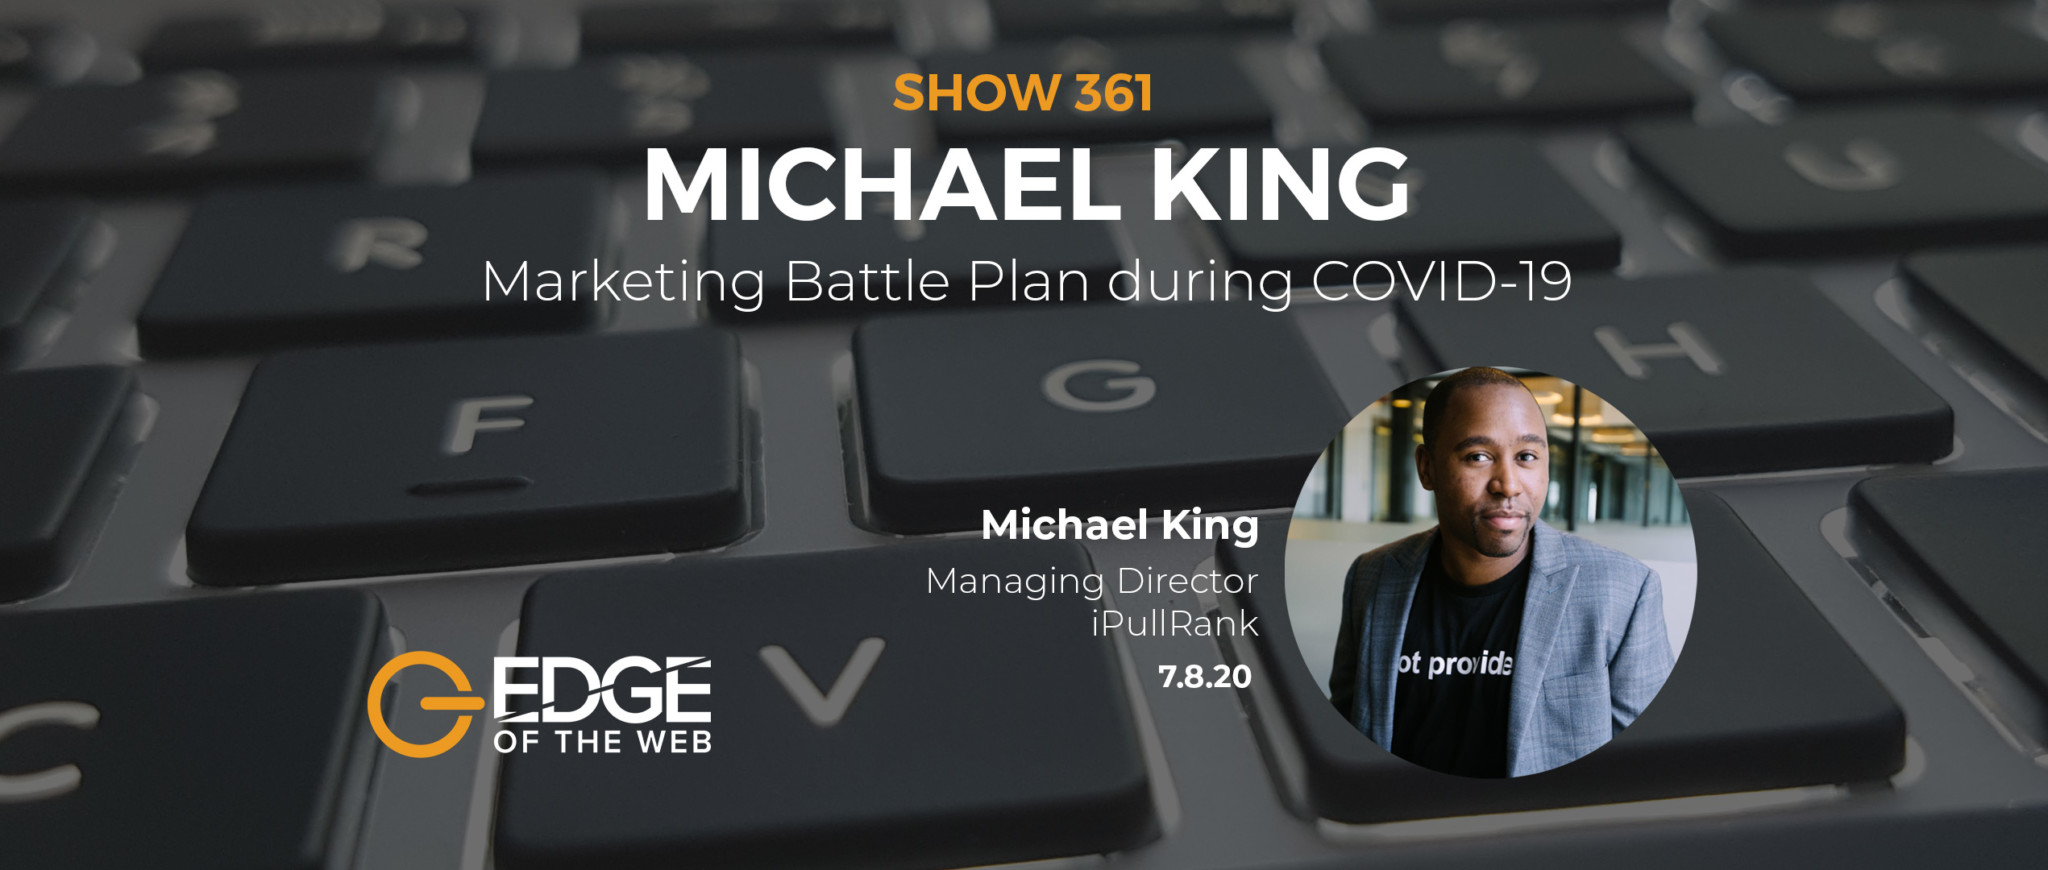 Michael King Featured Image for EDGE of the Web EP361